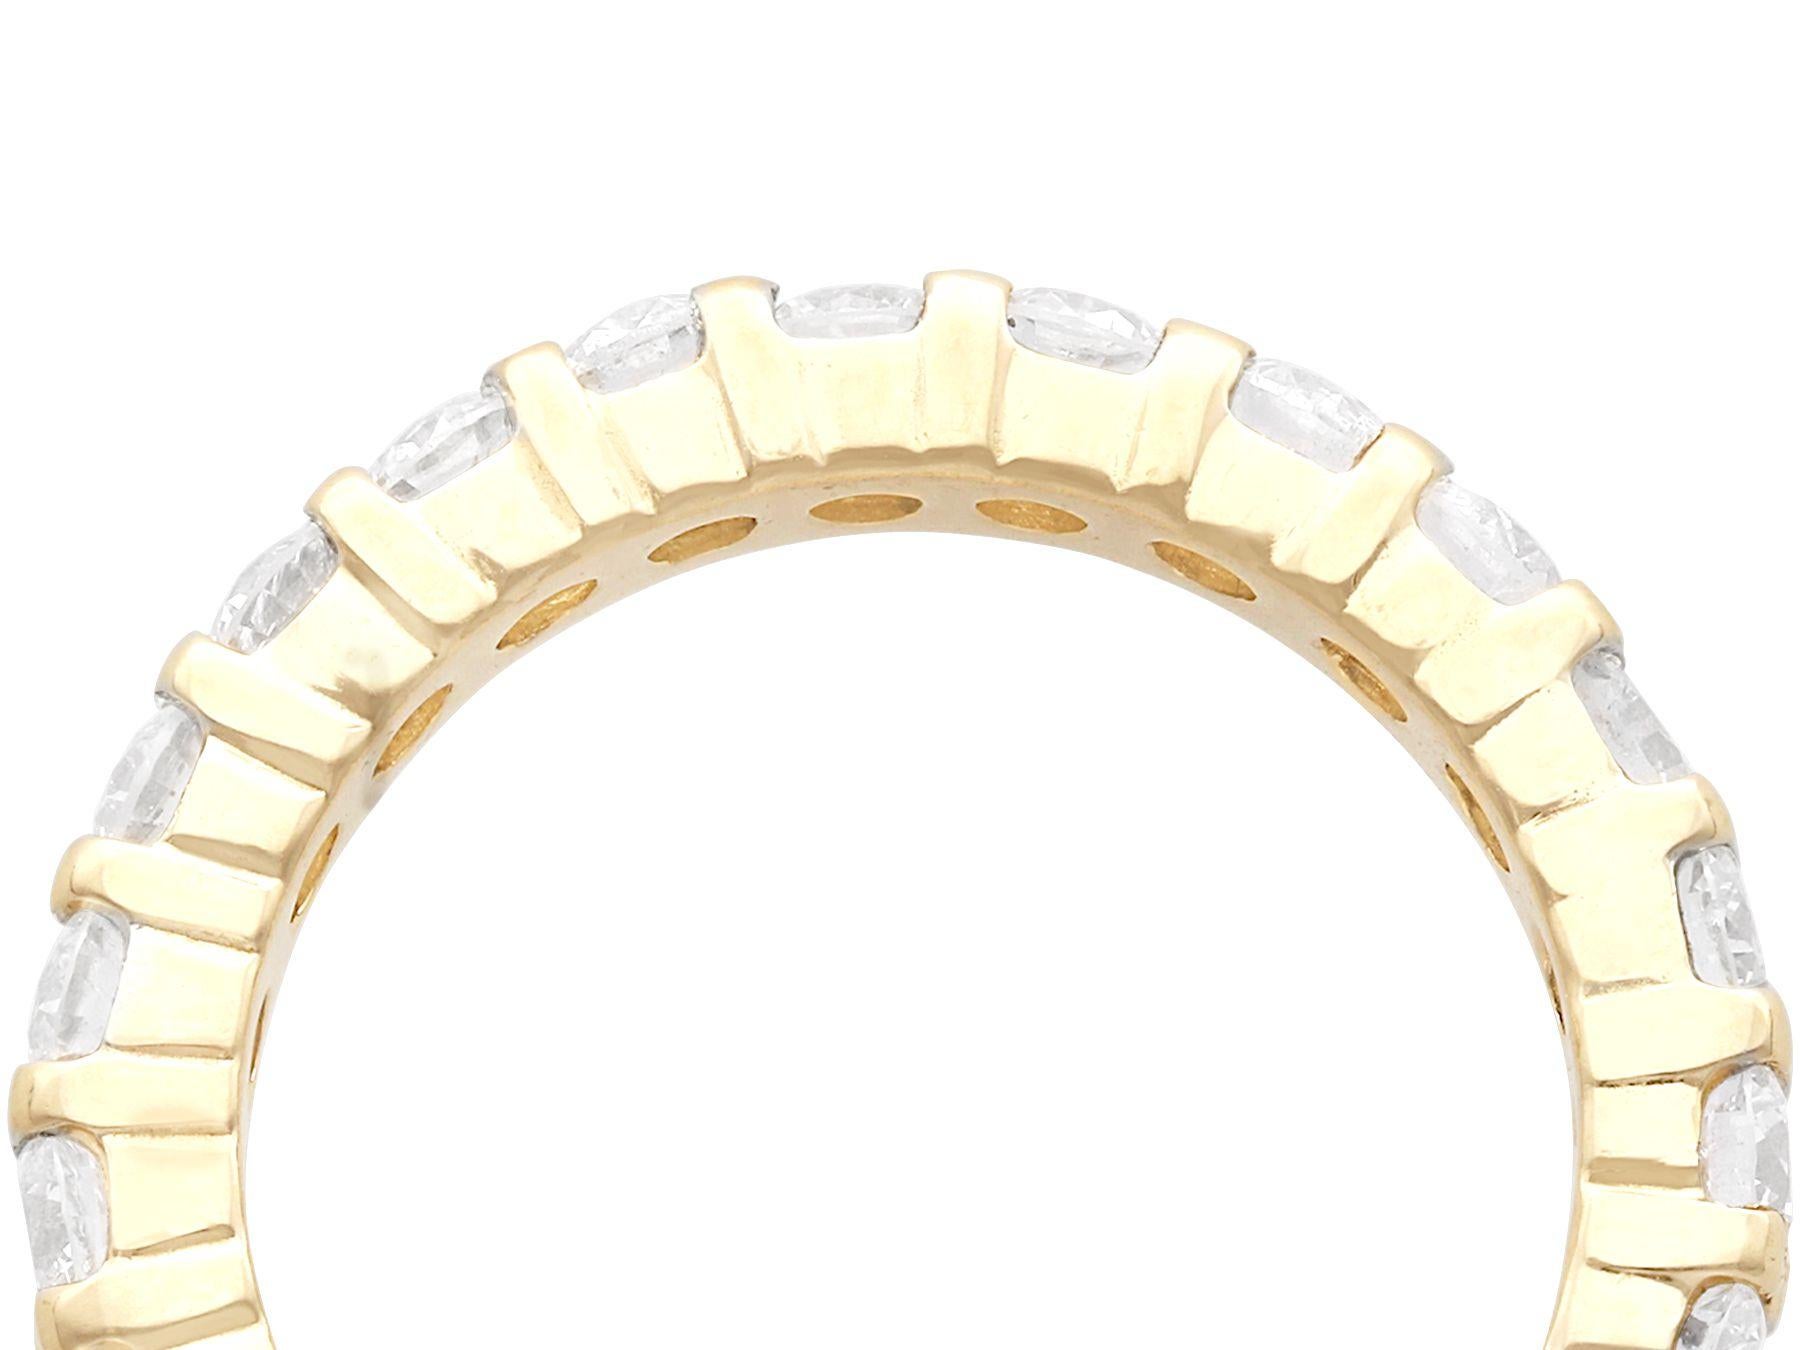 A fine and impressive vintage 1980s 1.84 carat diamond and 14 karat yellow gold full eternity ring; part of our diverse diamond jewellery and estate jewelry collections.

This fine and impressive vintage diamond ring has been crafted in 14k yellow